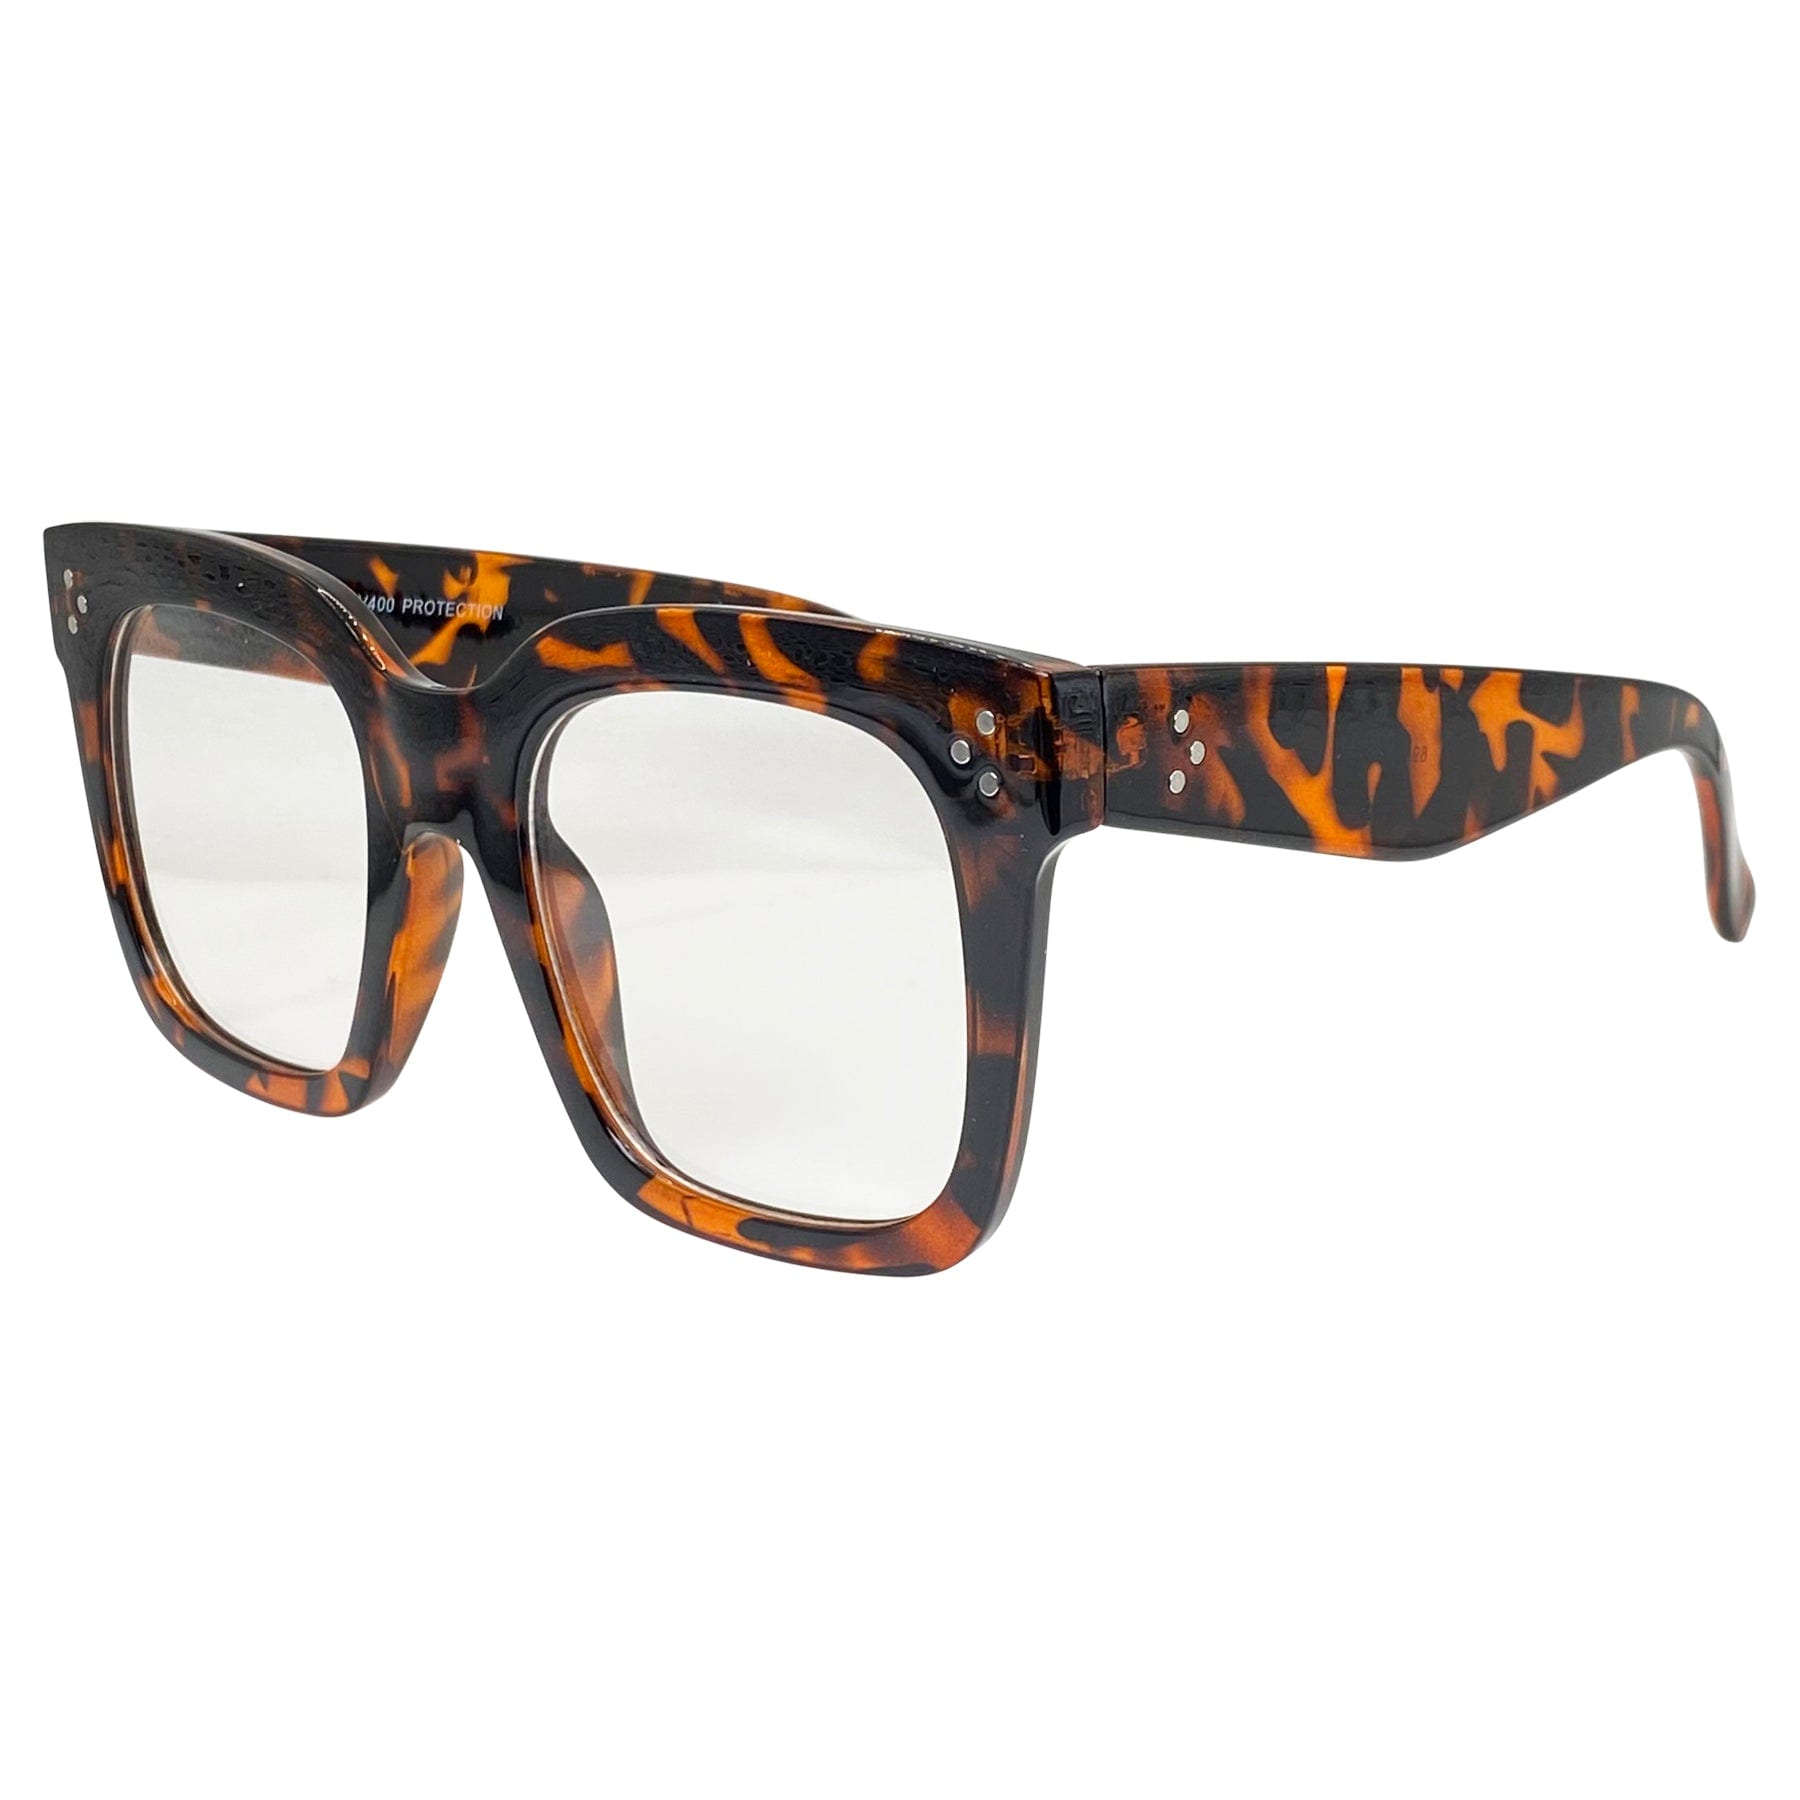 square clear round glasses with a tortoise color frame and clear lens